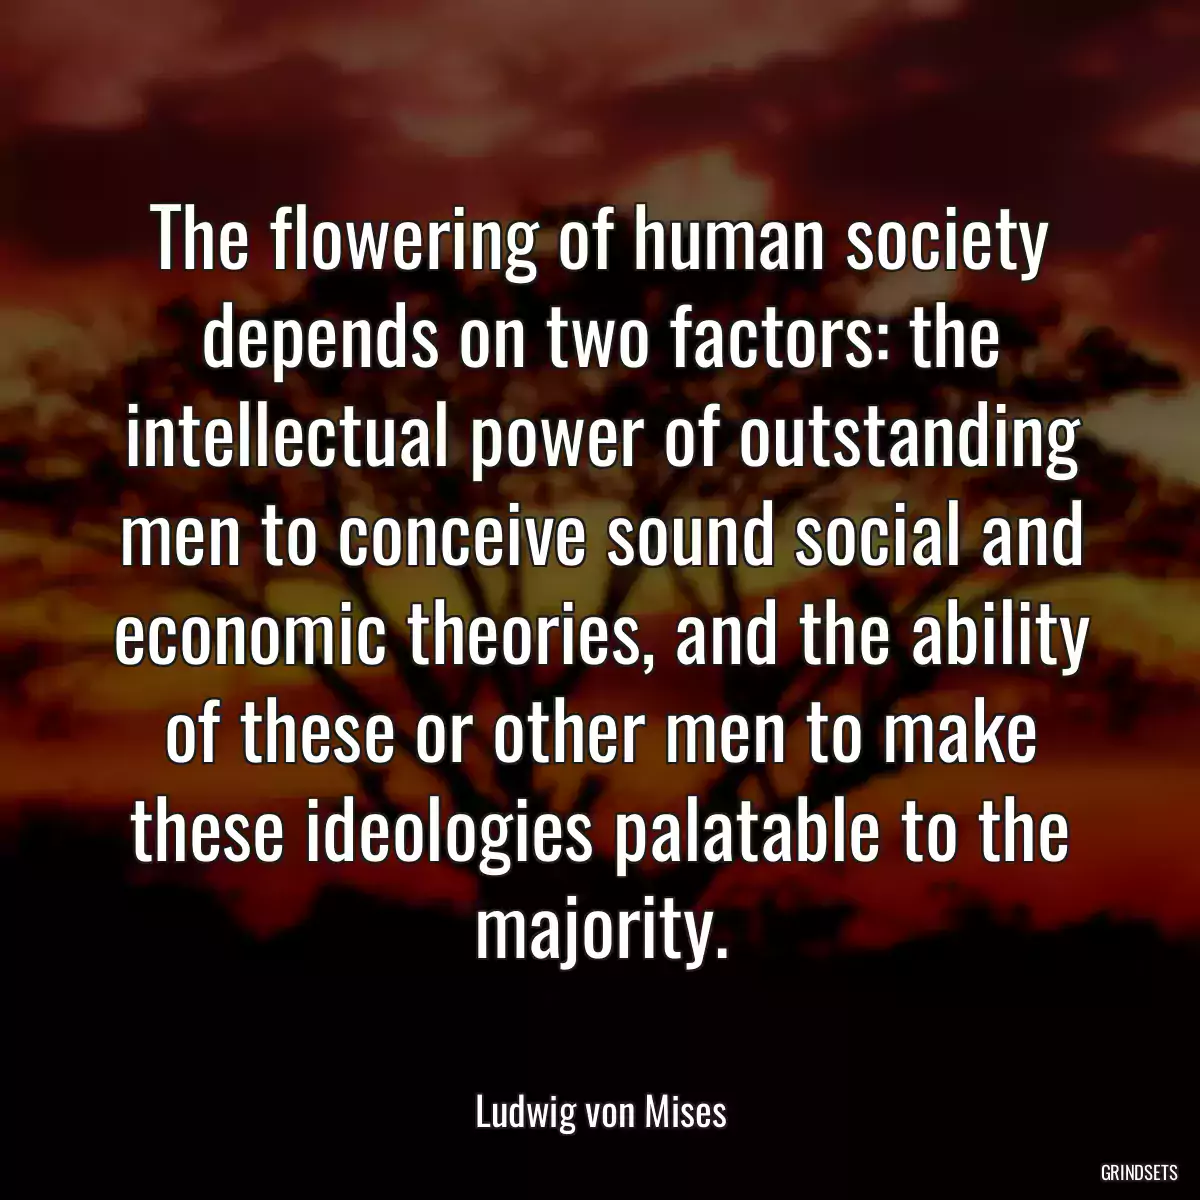 The flowering of human society depends on two factors: the intellectual power of outstanding men to conceive sound social and economic theories, and the ability of these or other men to make these ideologies palatable to the majority.